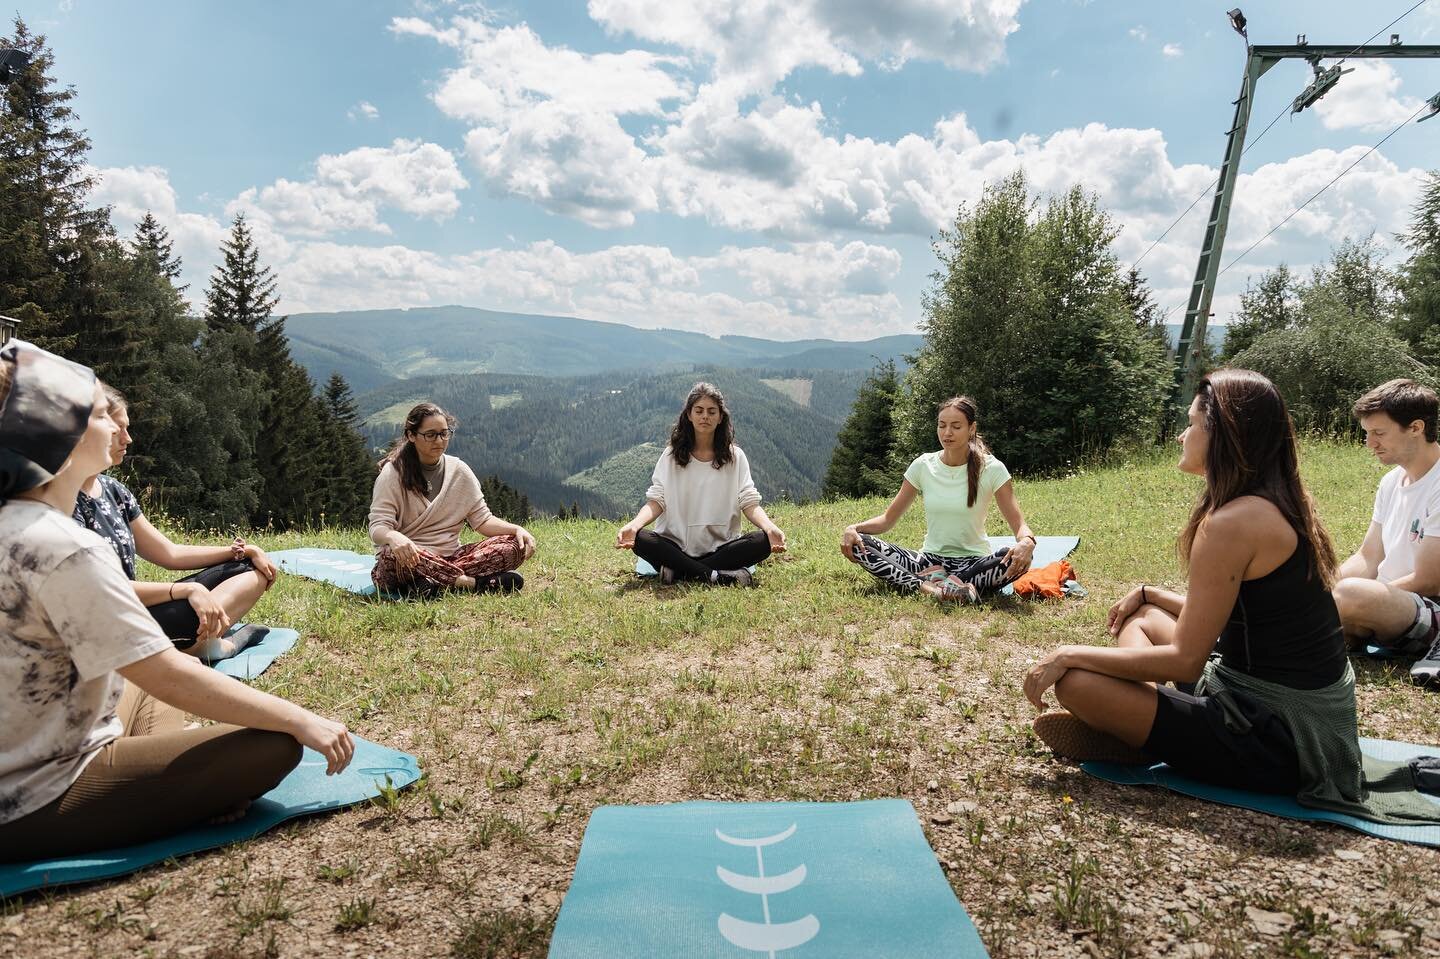 Feeling grateful for the opportunity to capture the beauty of the first retreat lead by @safiehmazzari and hosted by@alplresort with yoga taught by @ianarabelfor. What a beautiful team! 💗🙏🏼📸